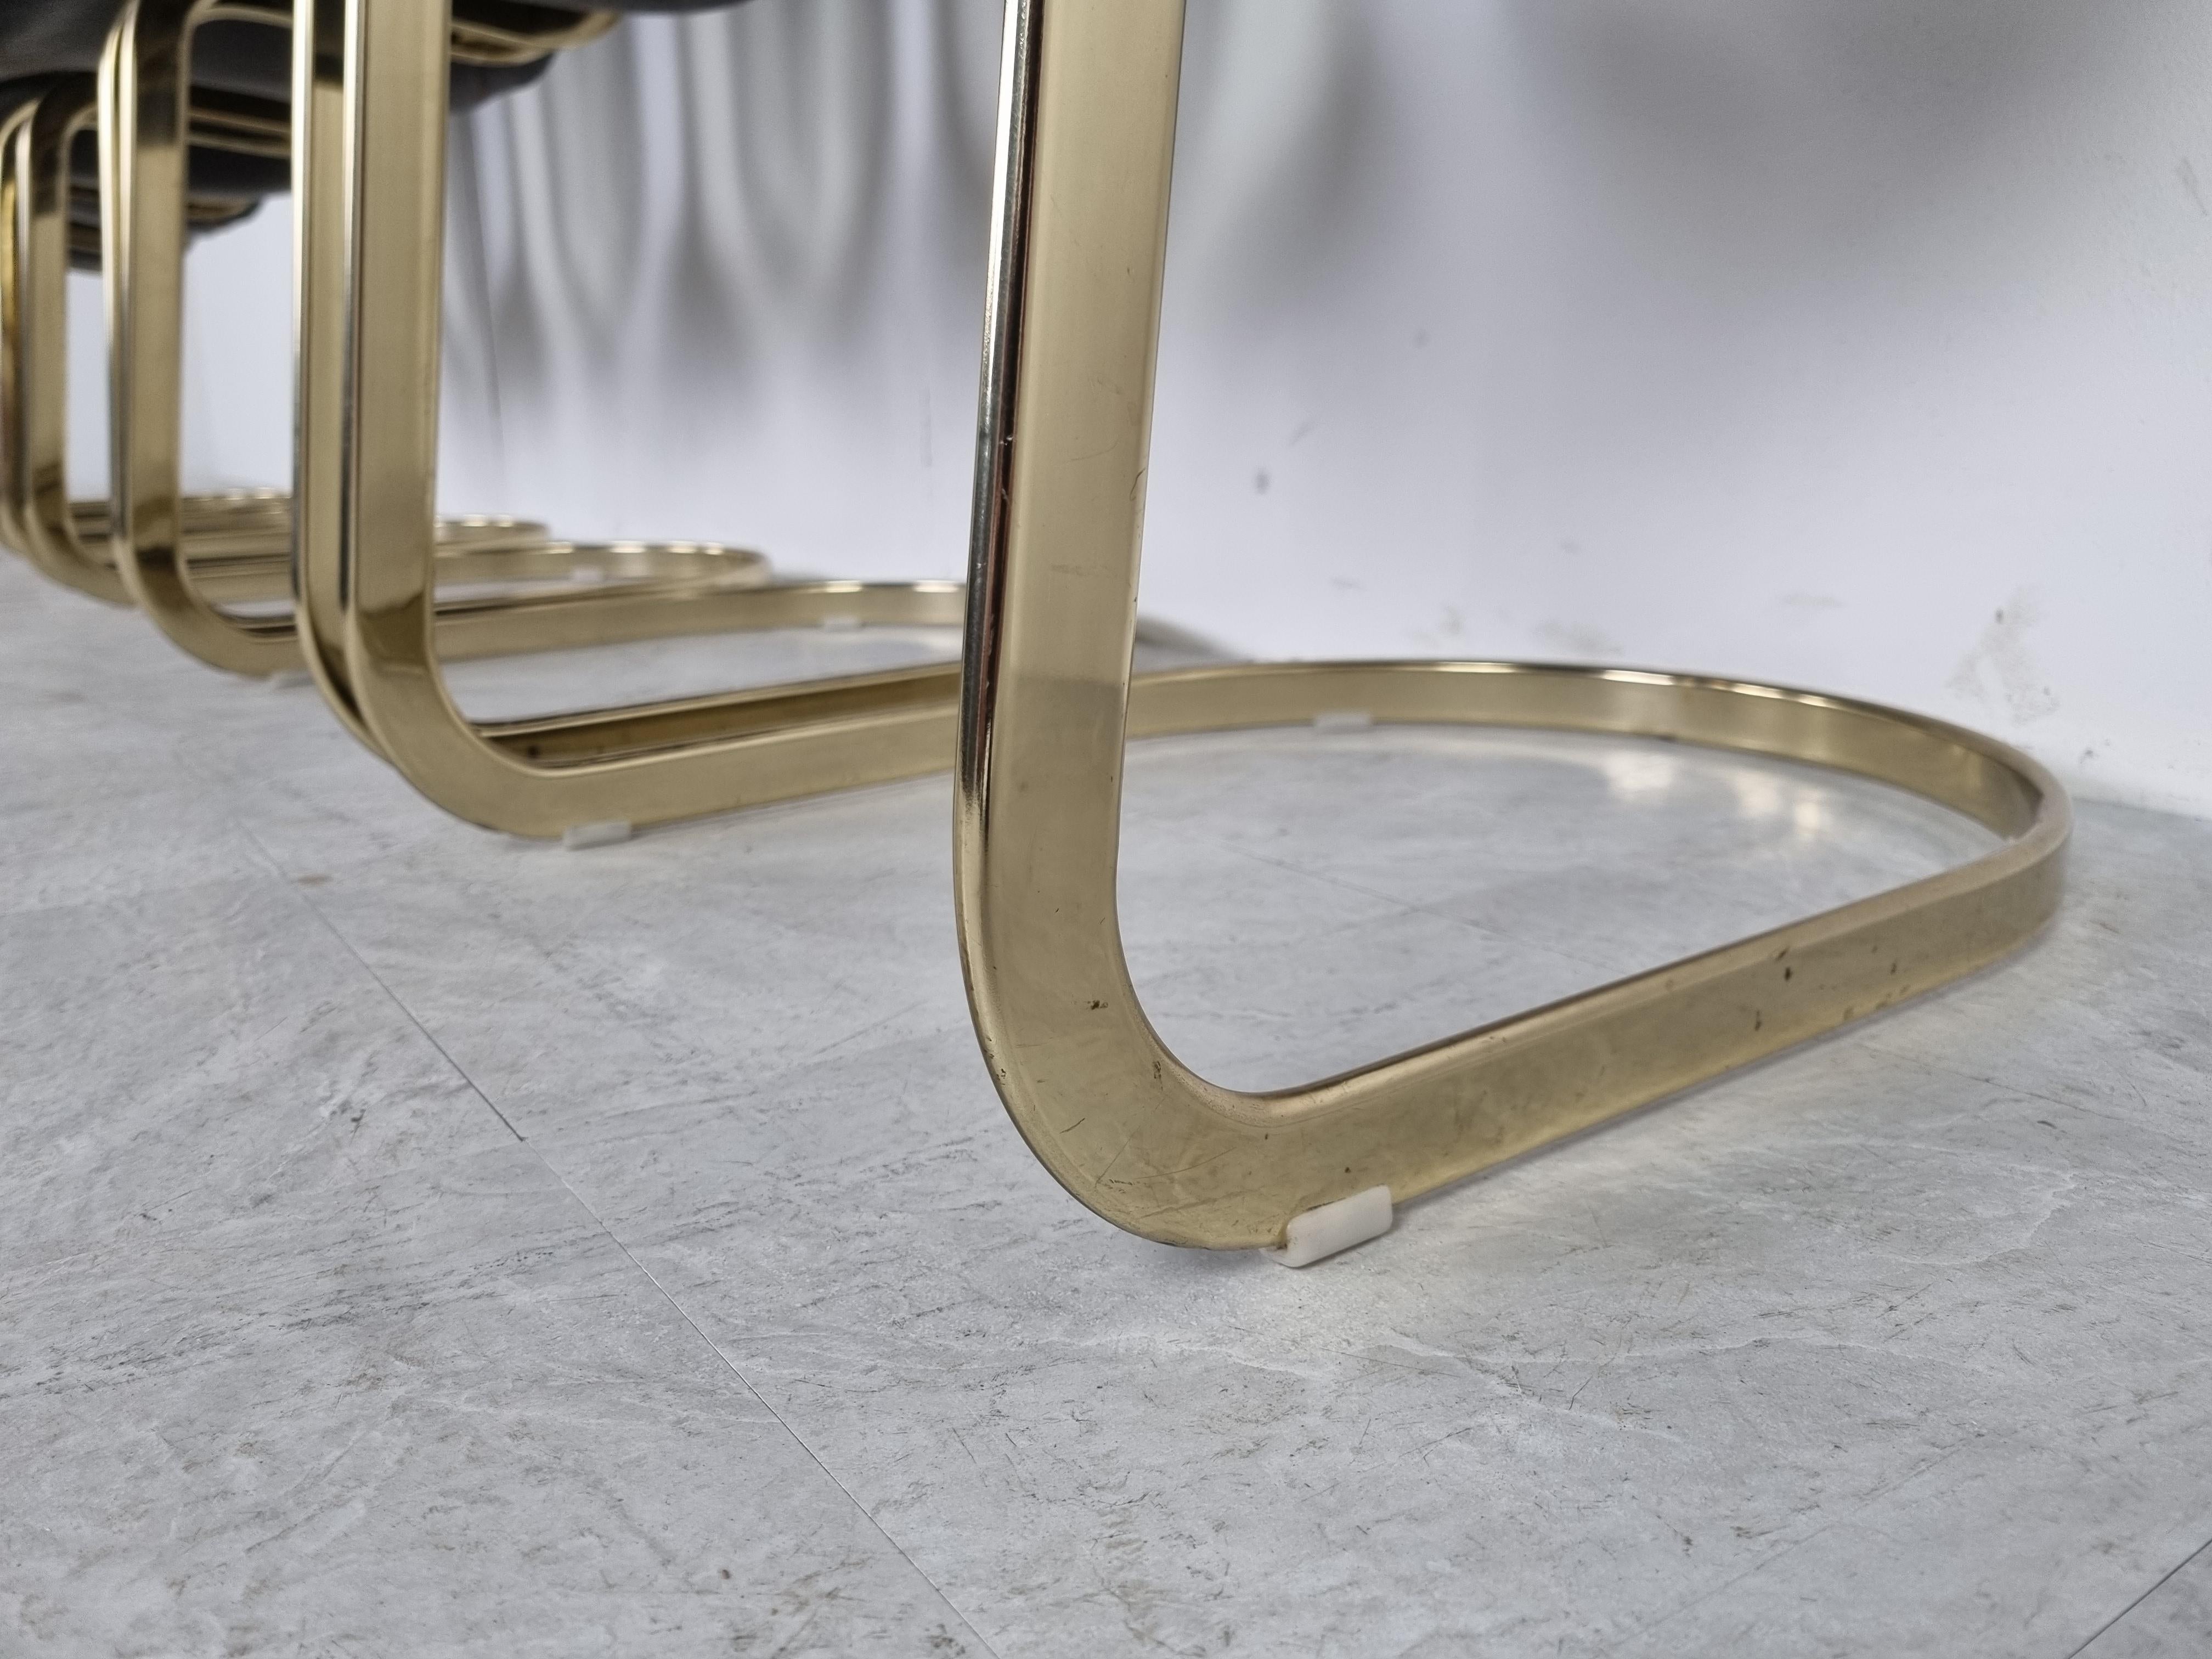 Late 20th Century Vintage Brass Dining Chairs by Willy Rizzo for Cidue Set of 6, 1970s